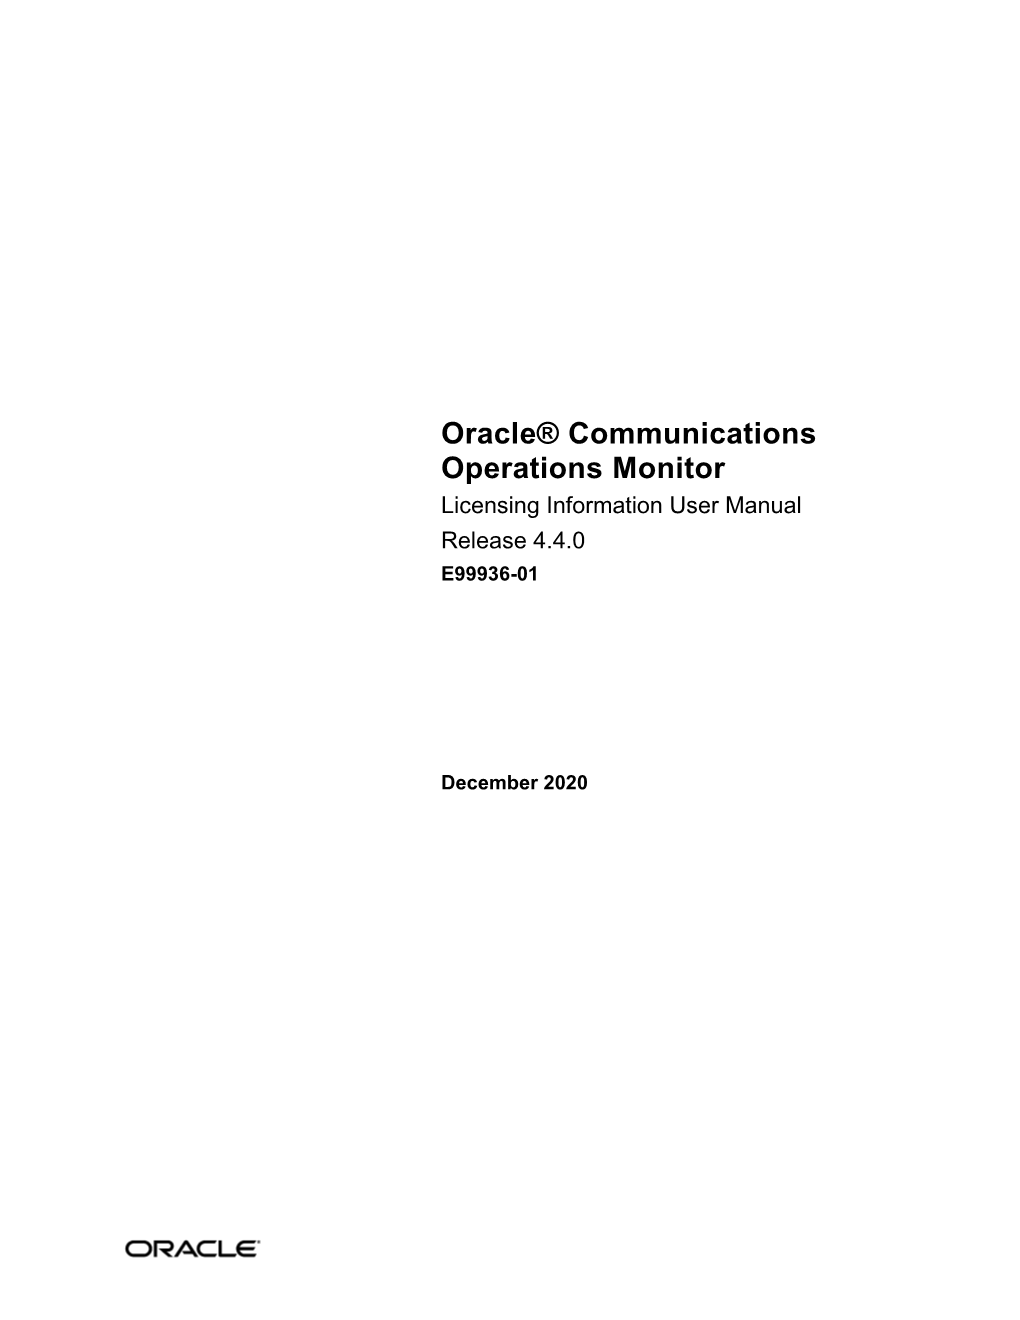 Oracle Communications Operations Monitor Licensing Information User Manual Licensing Information